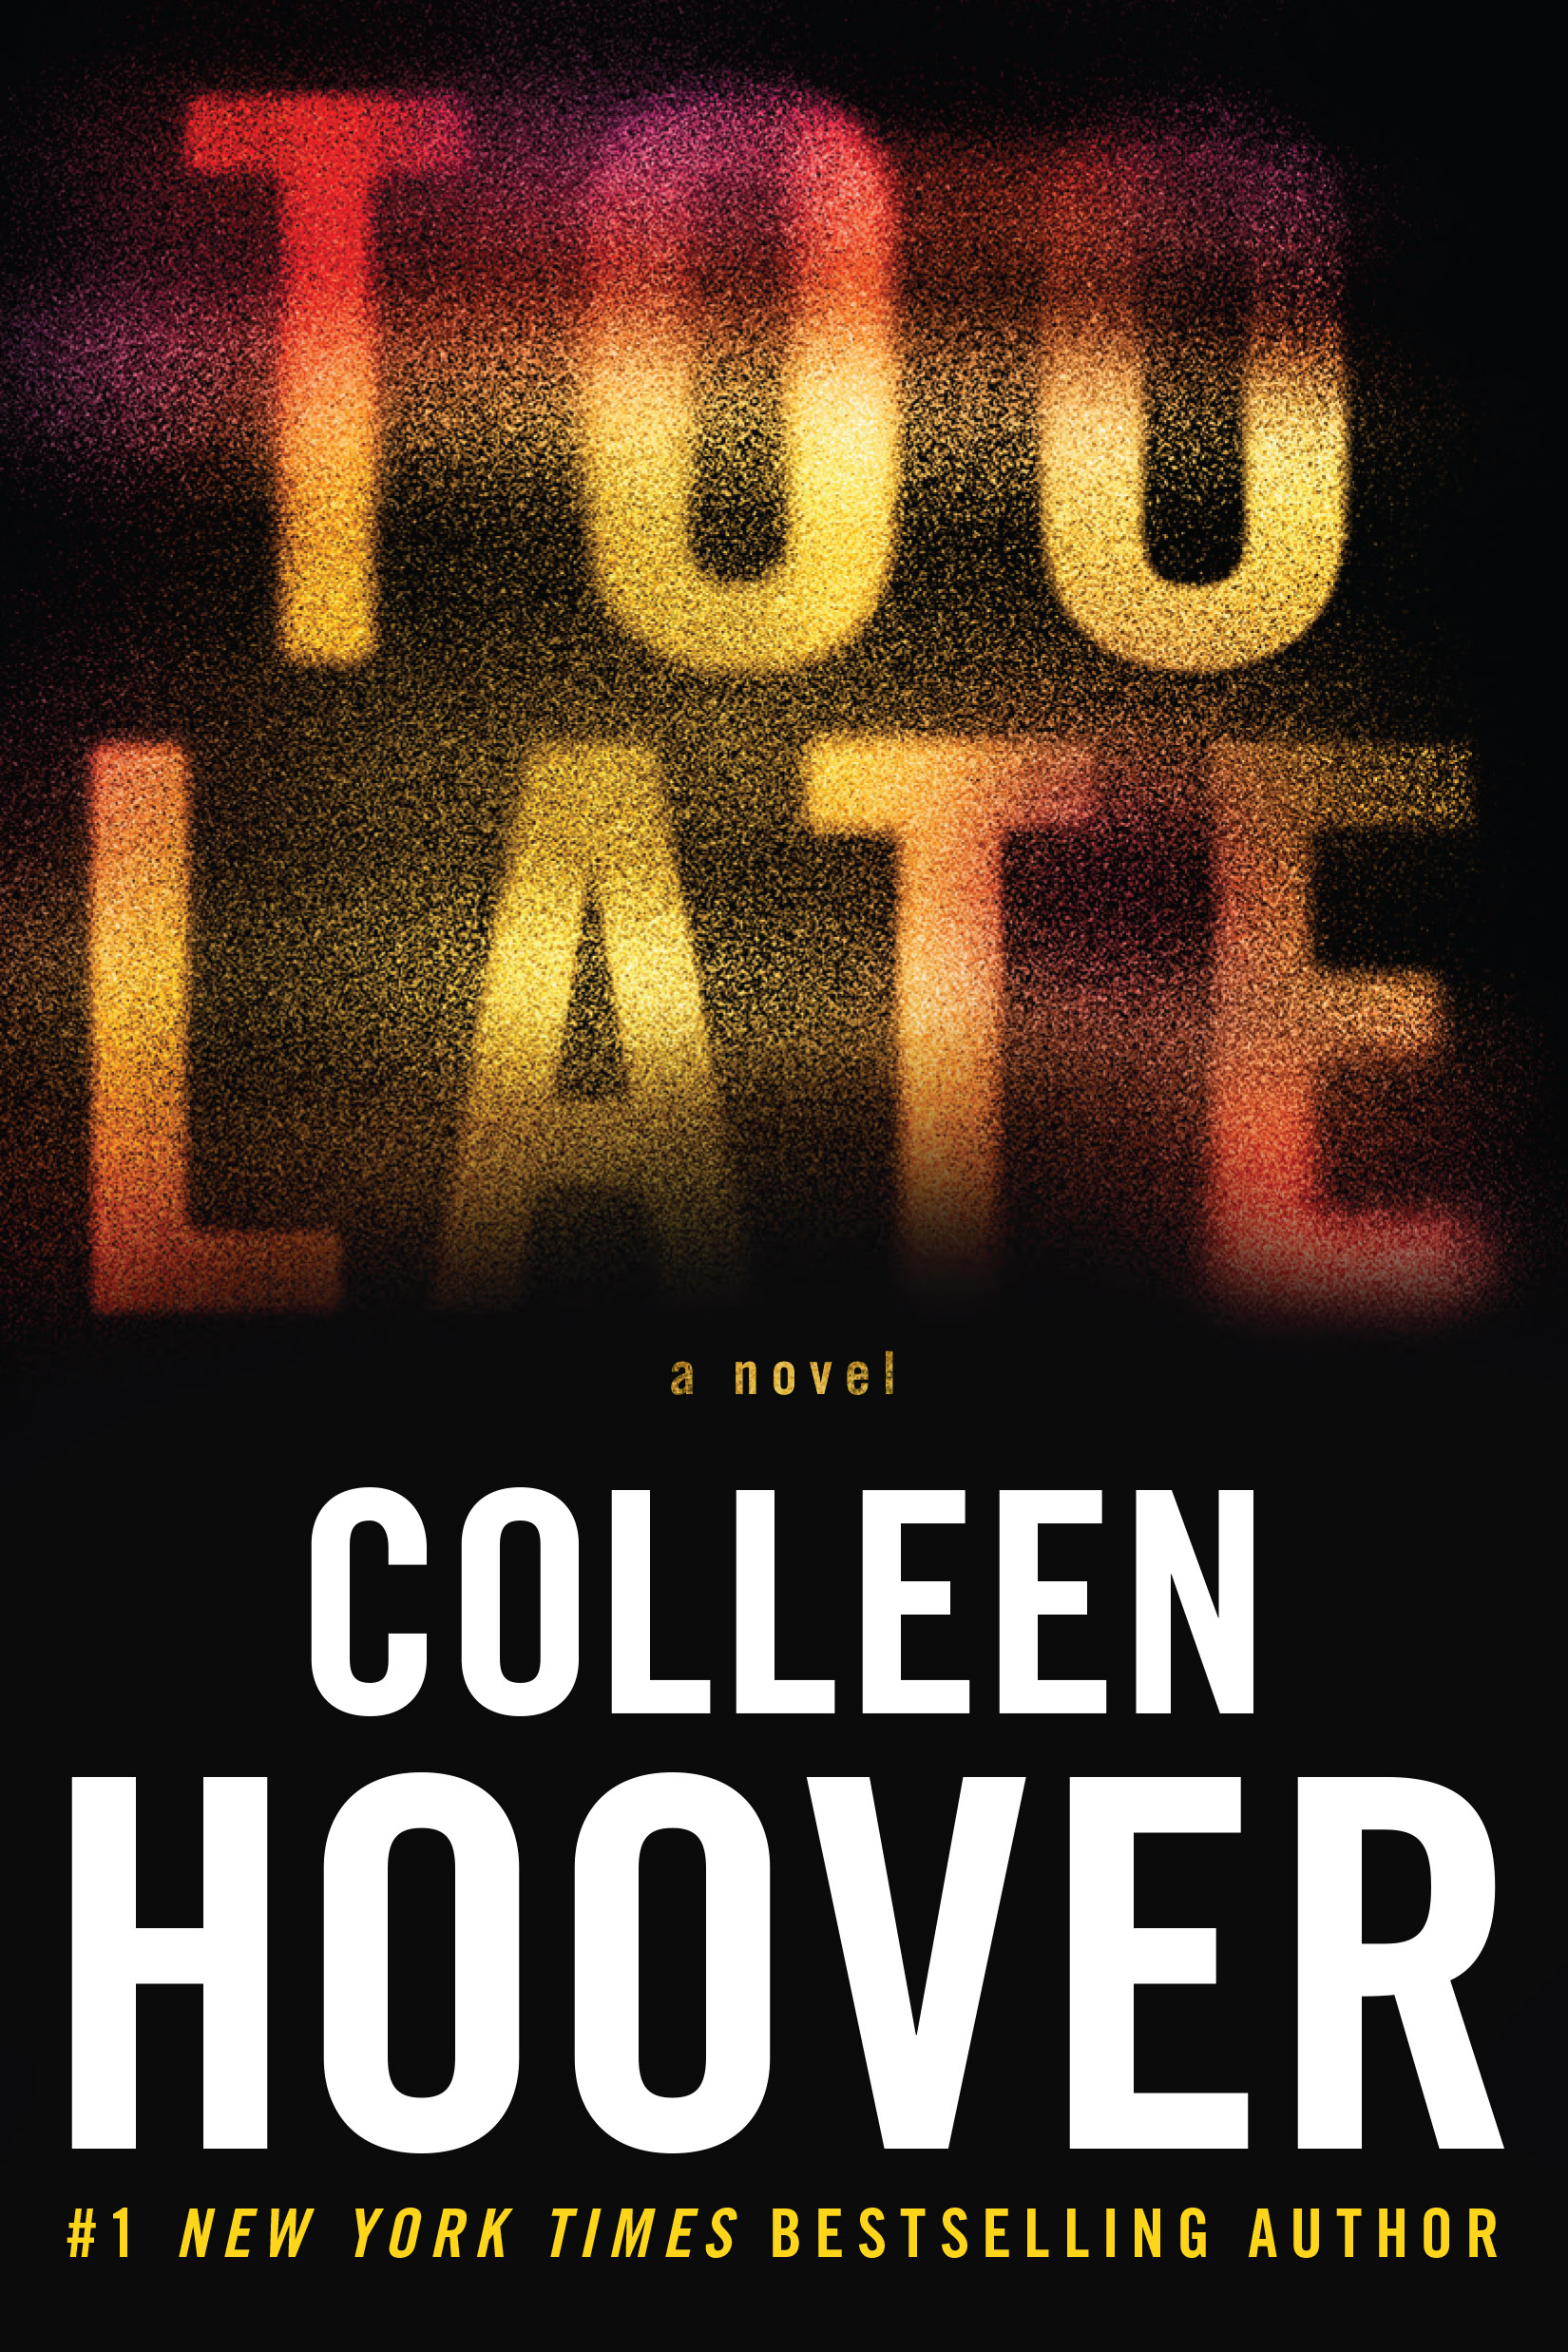 Colleen Hoover Books, Page 1